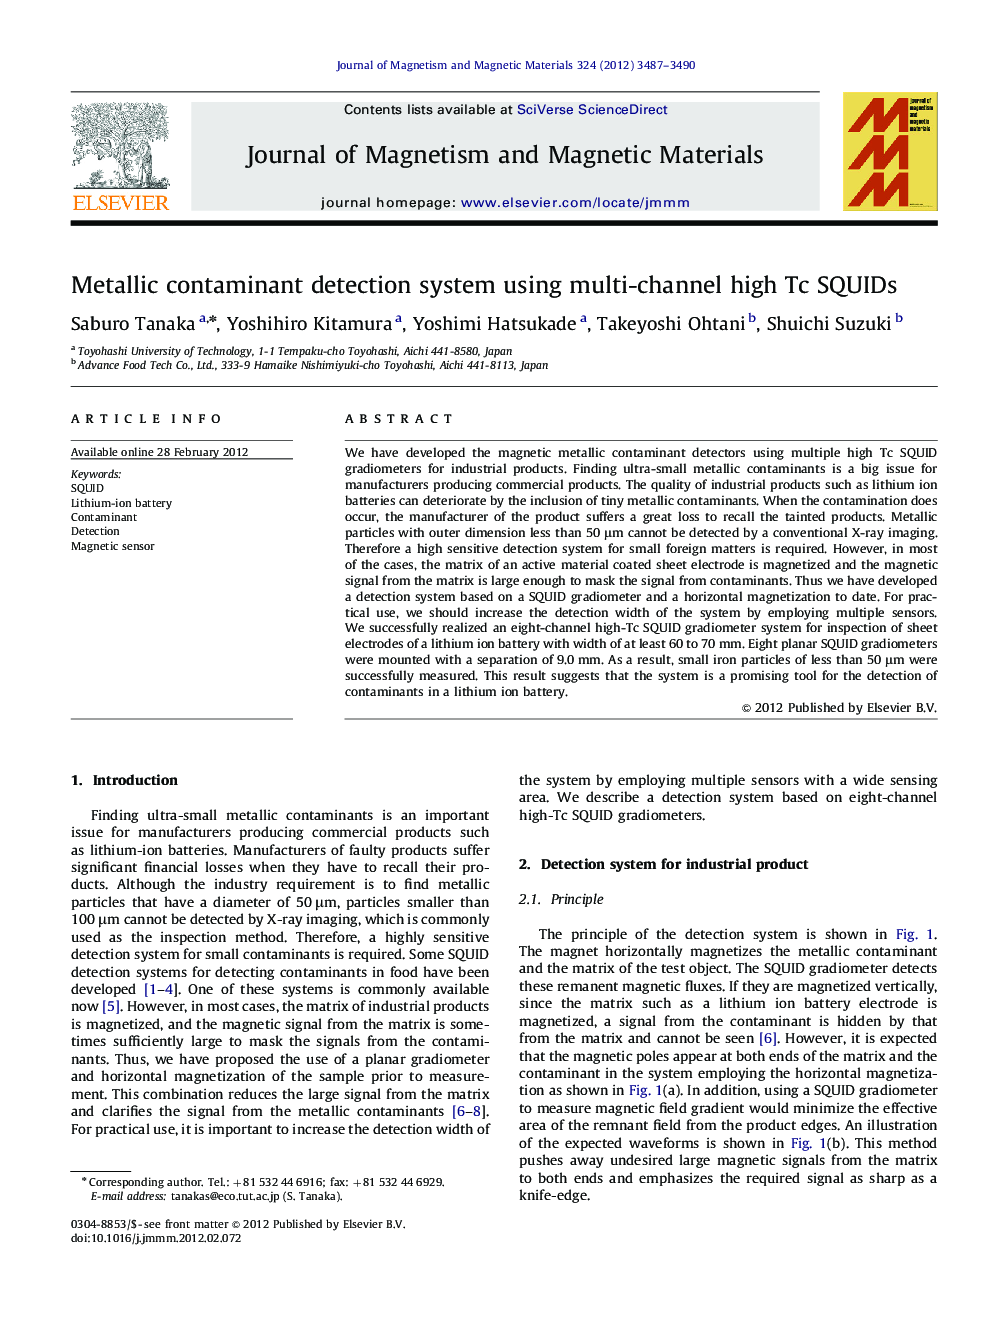 Metallic contaminant detection system using multi-channel high Tc SQUIDs